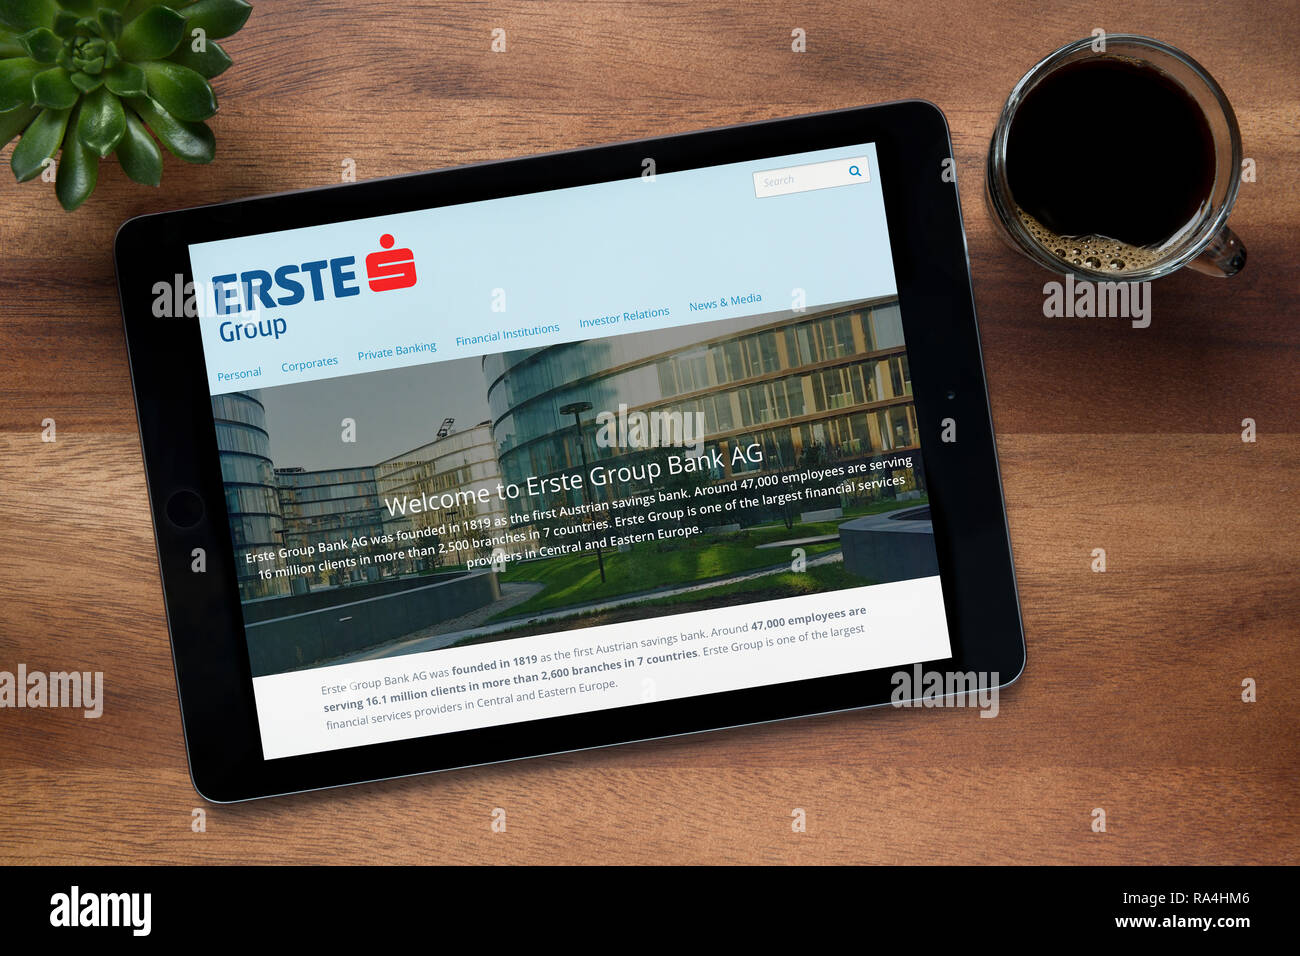 The website of Erste group is seen on an iPad tablet, on a wooden table along with an espresso coffee and a house plant (Editorial use only). Stock Photo